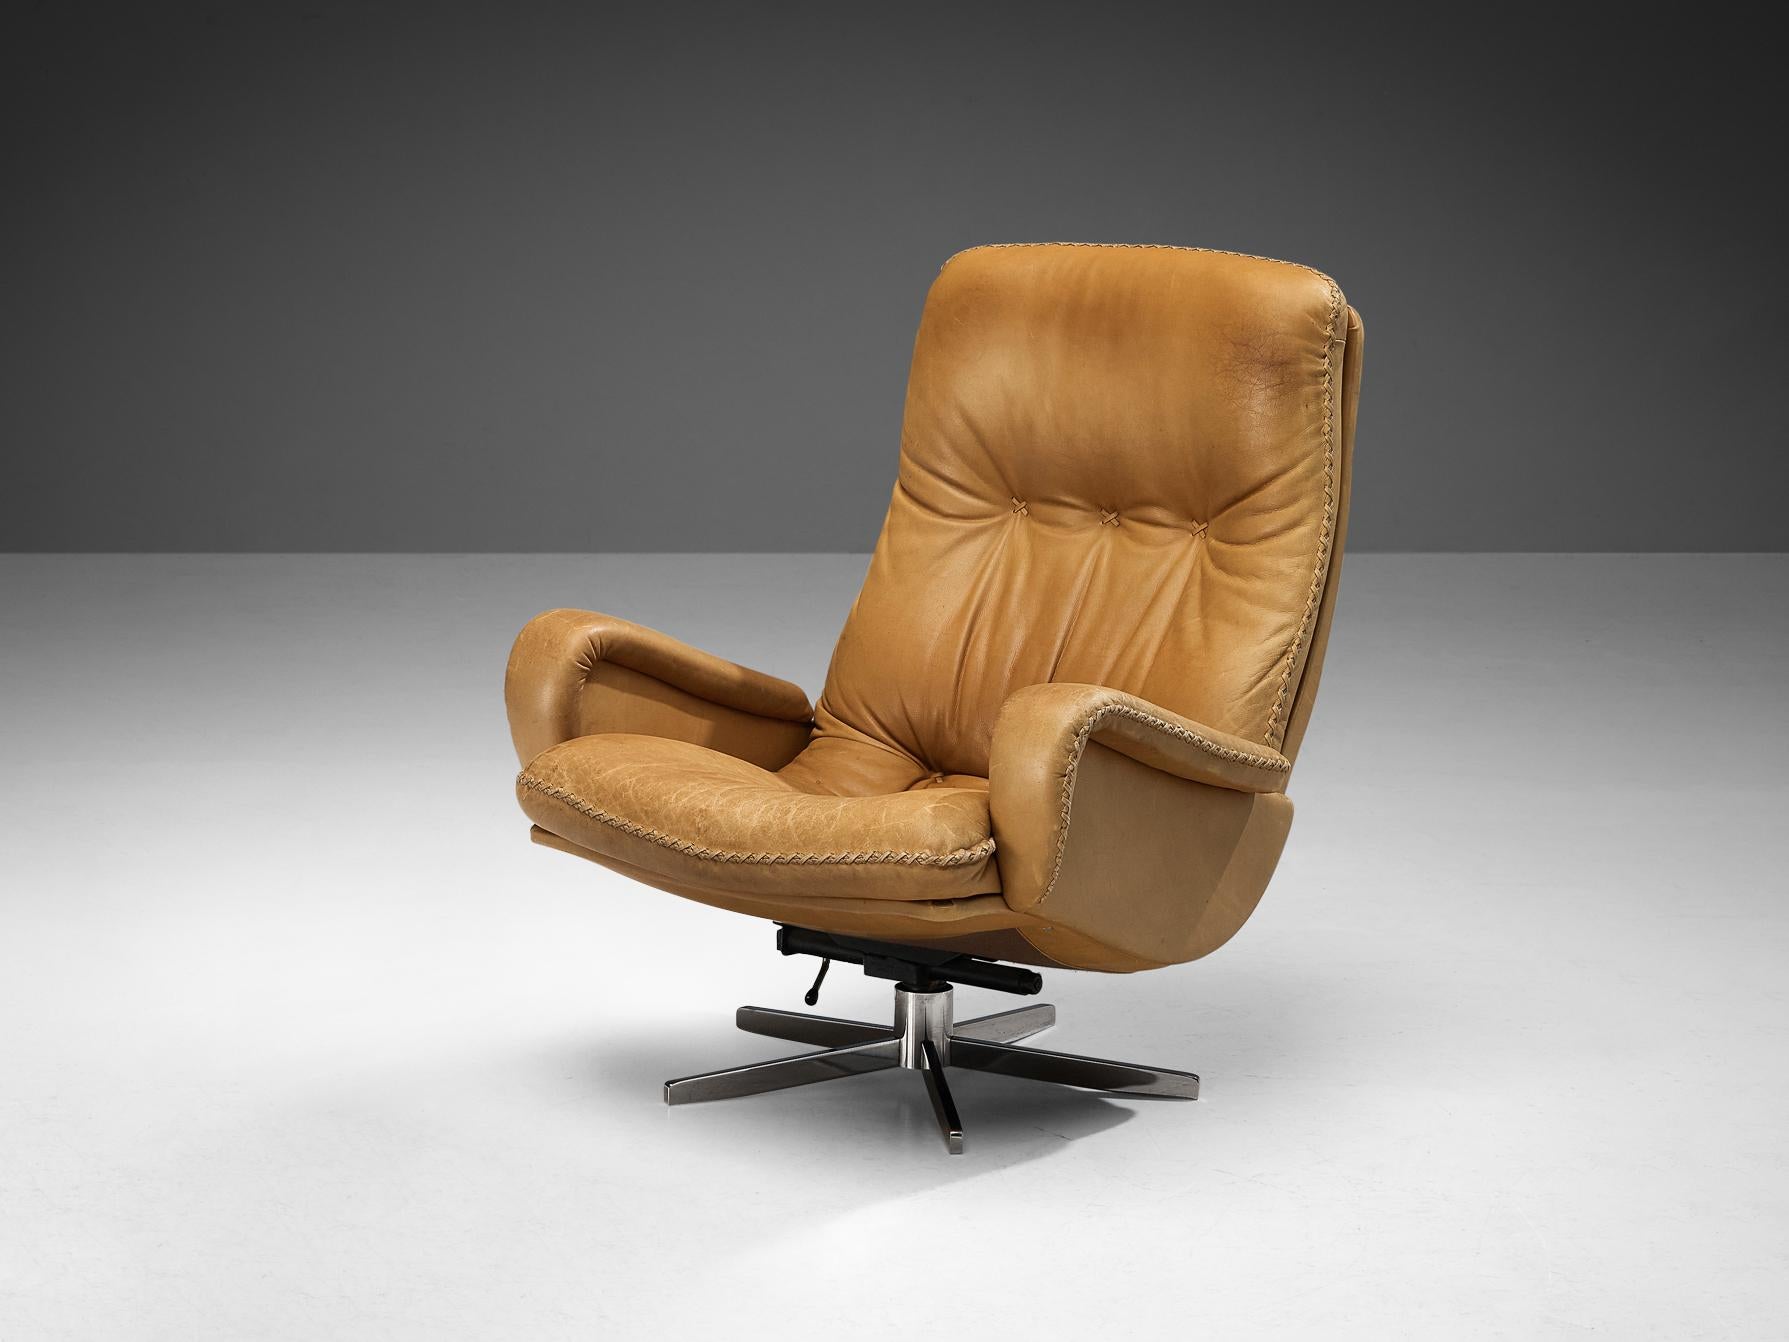 De Sede lounge chair, model 'S231', patinated leather, chromed metal, Switzerland, 1960s

This lovely and stylish chair is based on a solid construction featuring a large backrest and deep seat which offers great comfort to the sitter. The designer